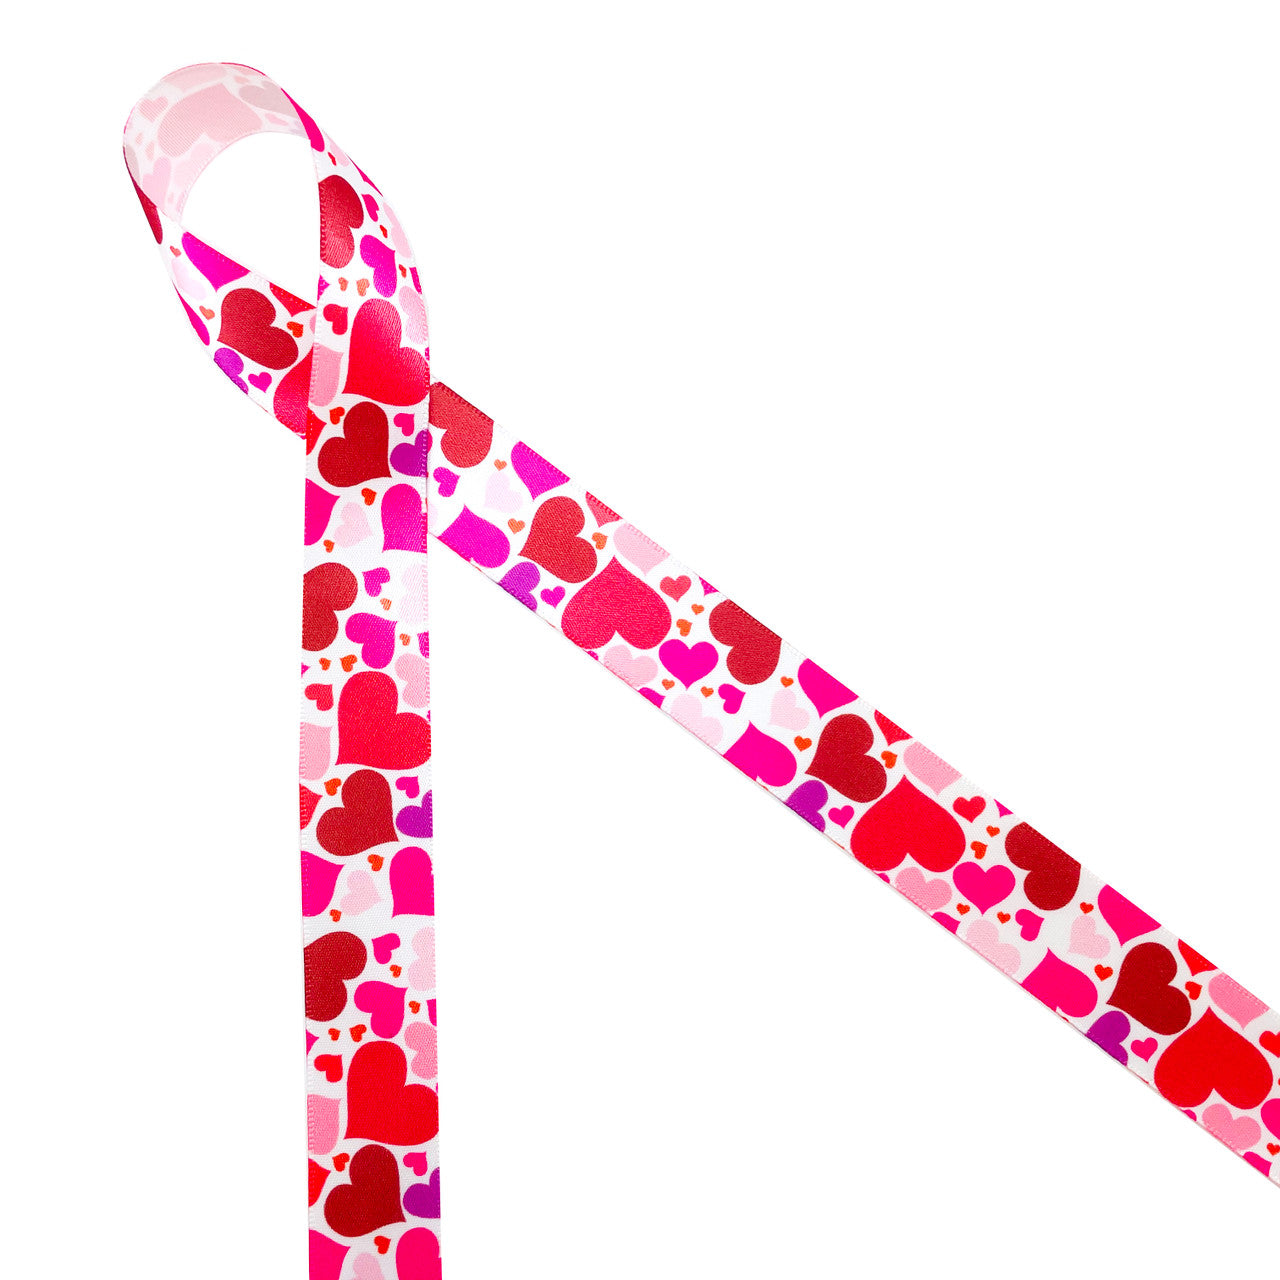 Tossed hearts in pink and red on 7/8" white single face satin  ribbon is such a fun design for Valentine's Day. This is a great ribbon for gift wrap, party decor, scrapbooking and craft projects with a love theme! Be sure to have this versatile ribbon on hand for your Valentine needs! All our ribbon is designed and printed in the USA